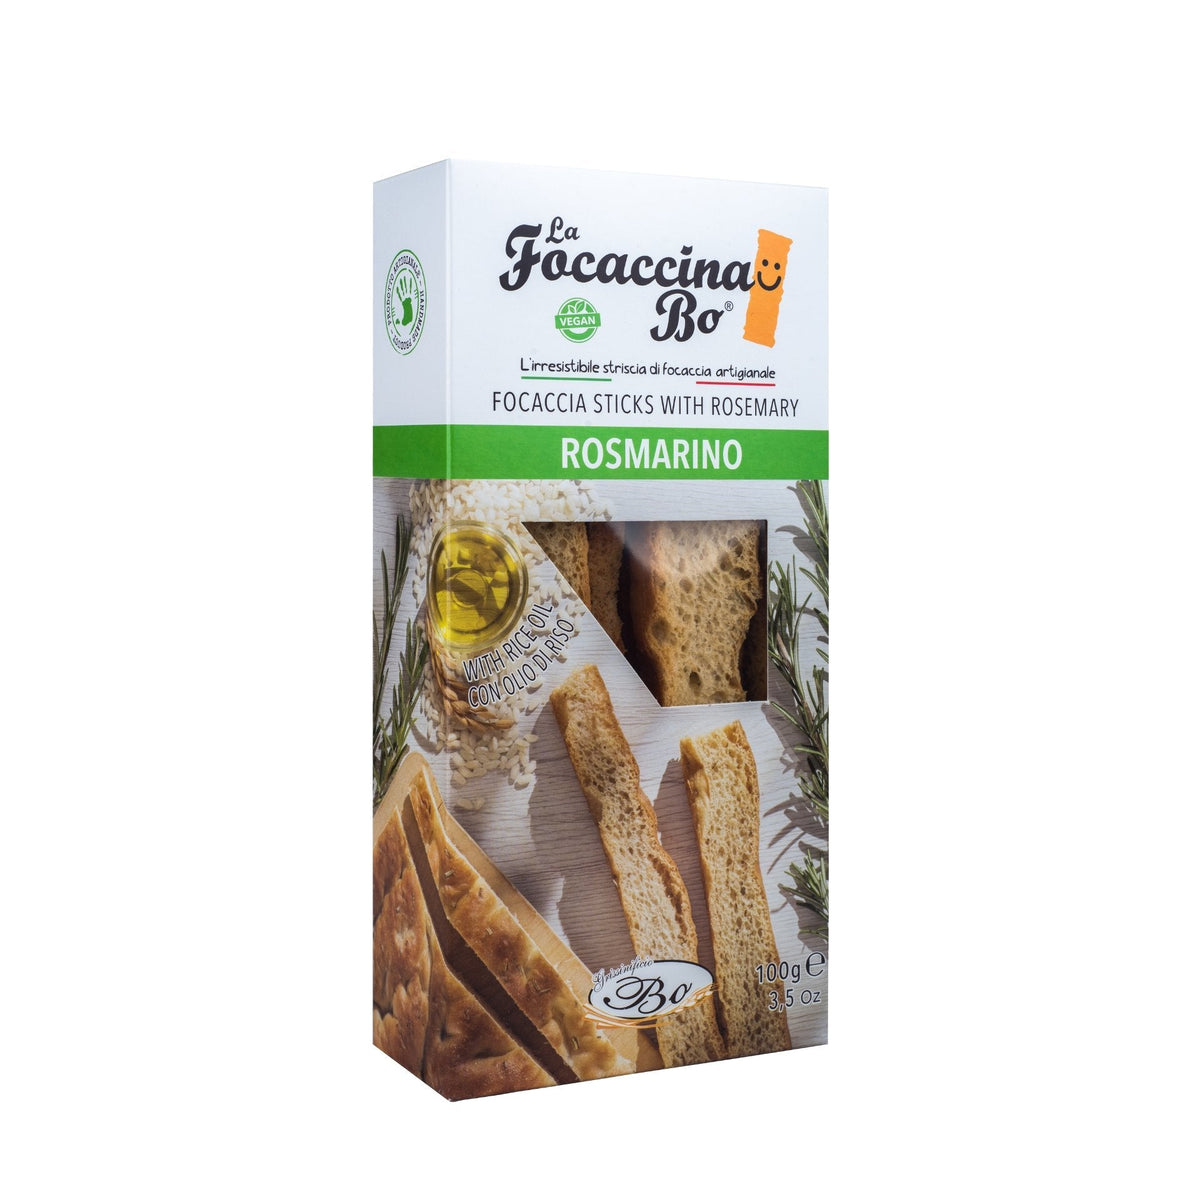 Grissinificio Bo Rosemary Focaccina (boxed) 100g  | Imported and distributed in the UK by Just Gourmet Foods